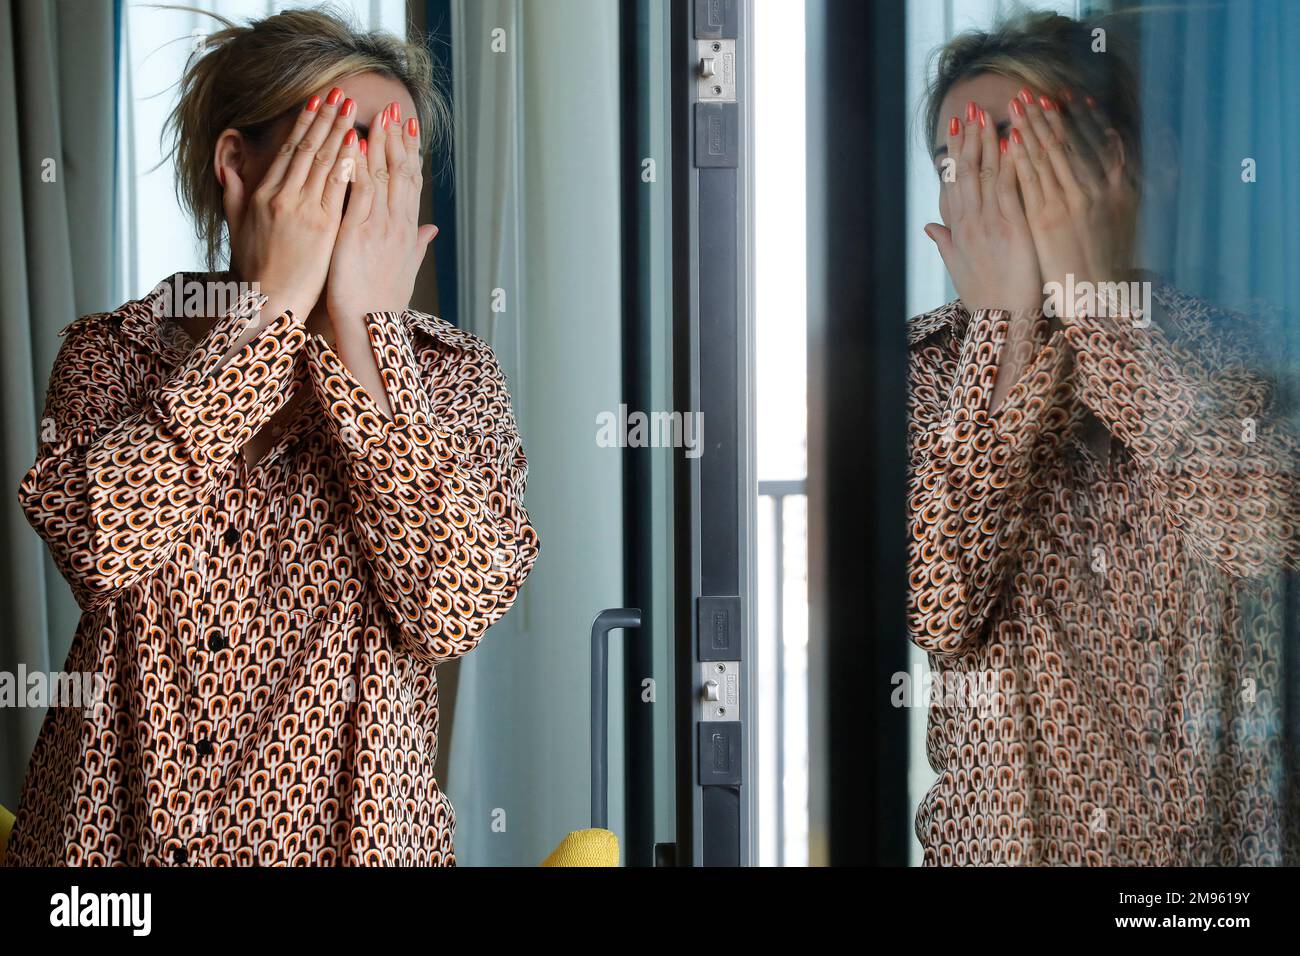 Woman covering her face with her hand. Depression.  Reflection in window. Stock Photo